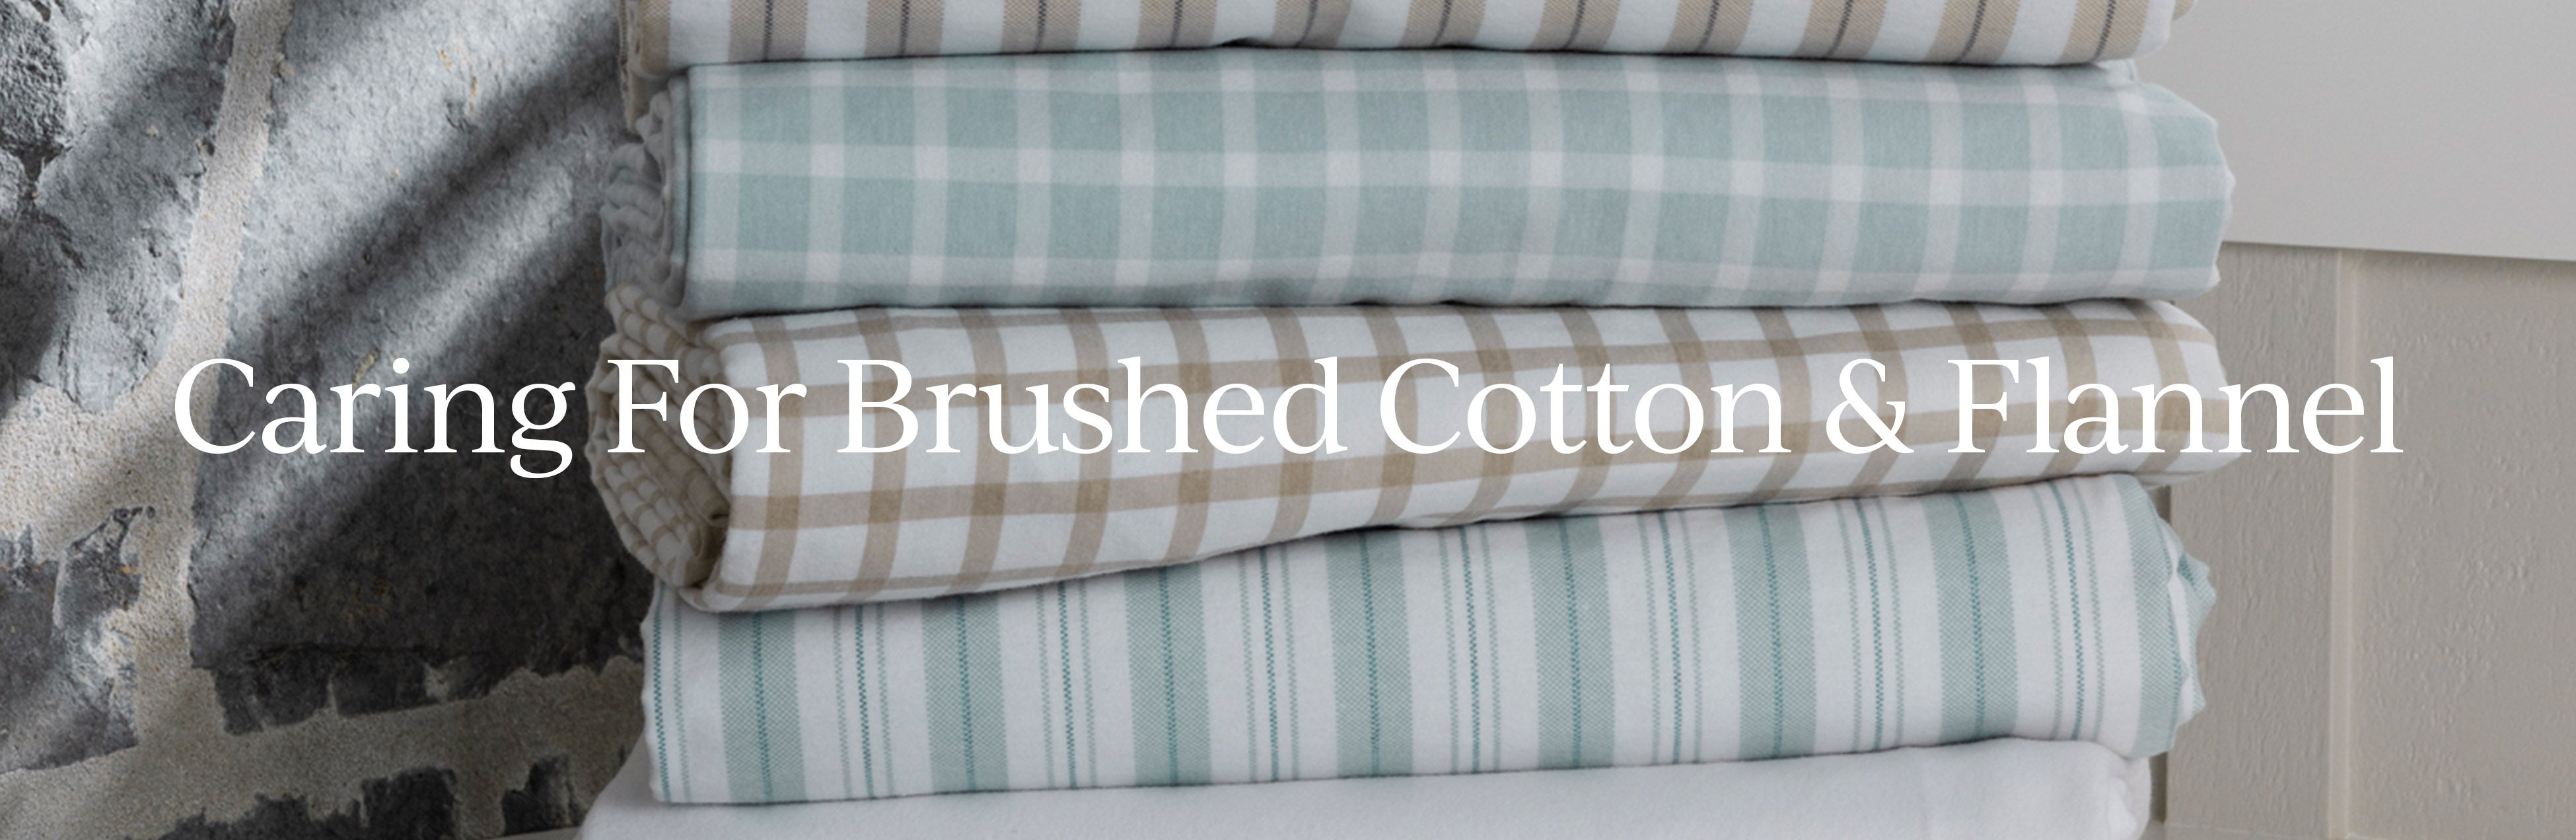 What is brushed cotton?